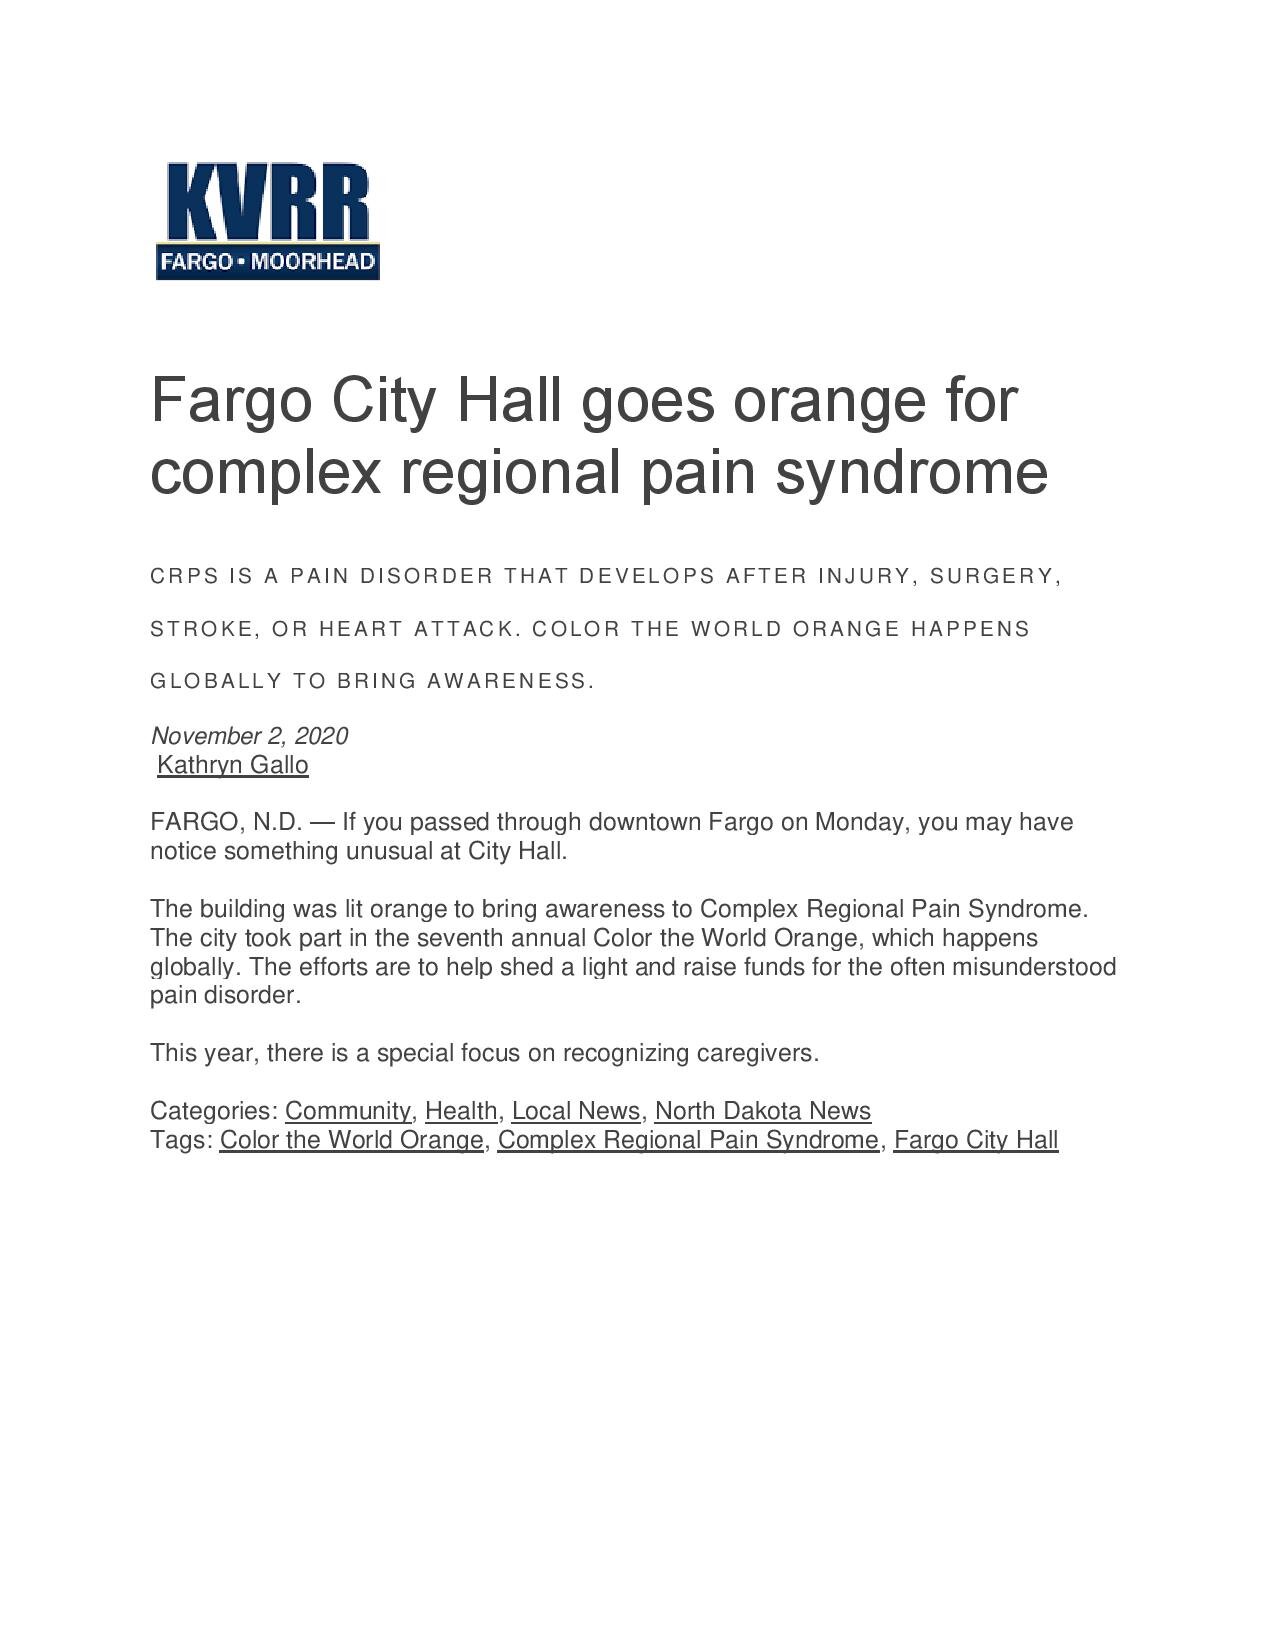 Fargo City Hall goes orange for complex regional pain syndrome-page-001.jpg